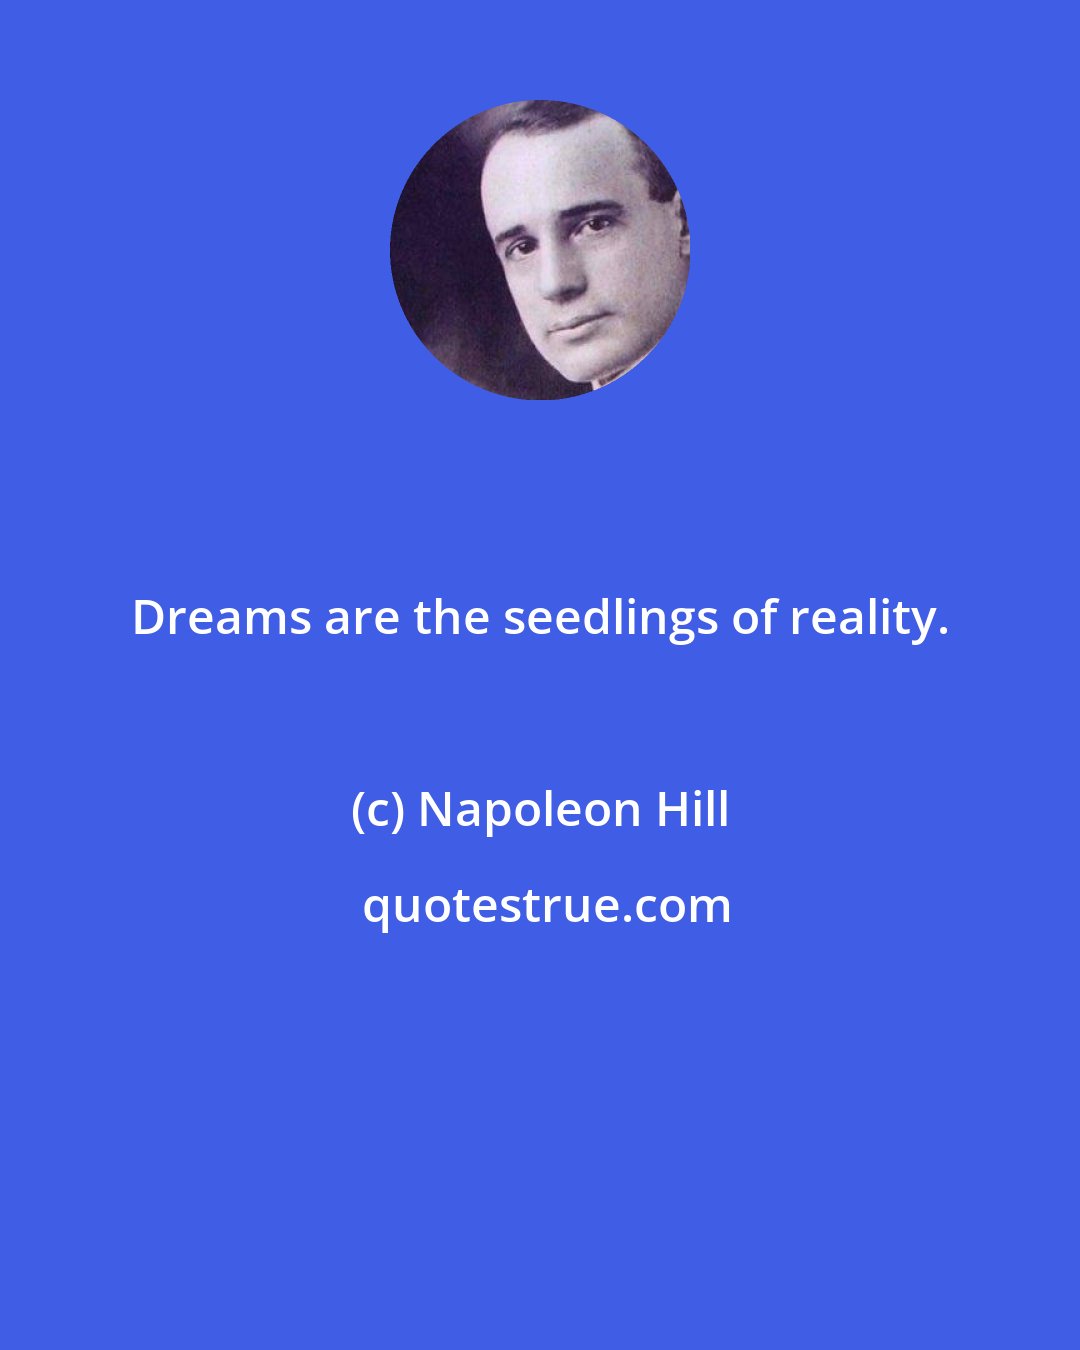 Napoleon Hill: Dreams are the seedlings of reality.